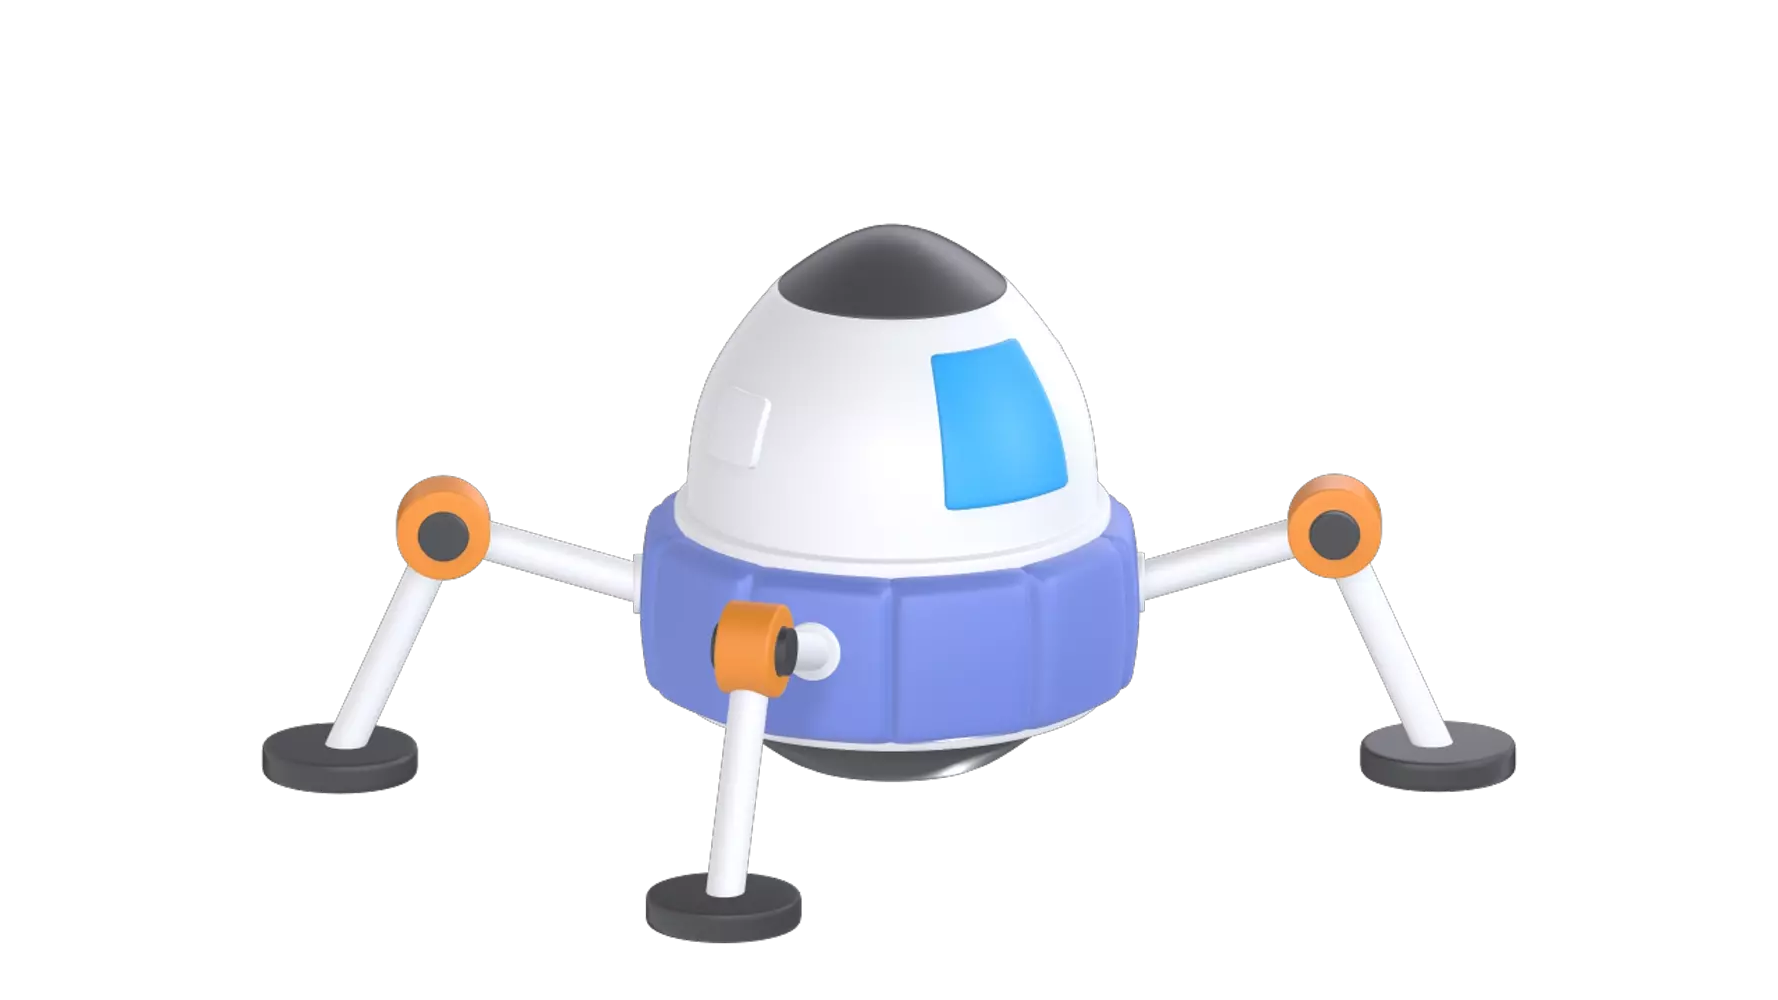 Space Robot 3D Graphic